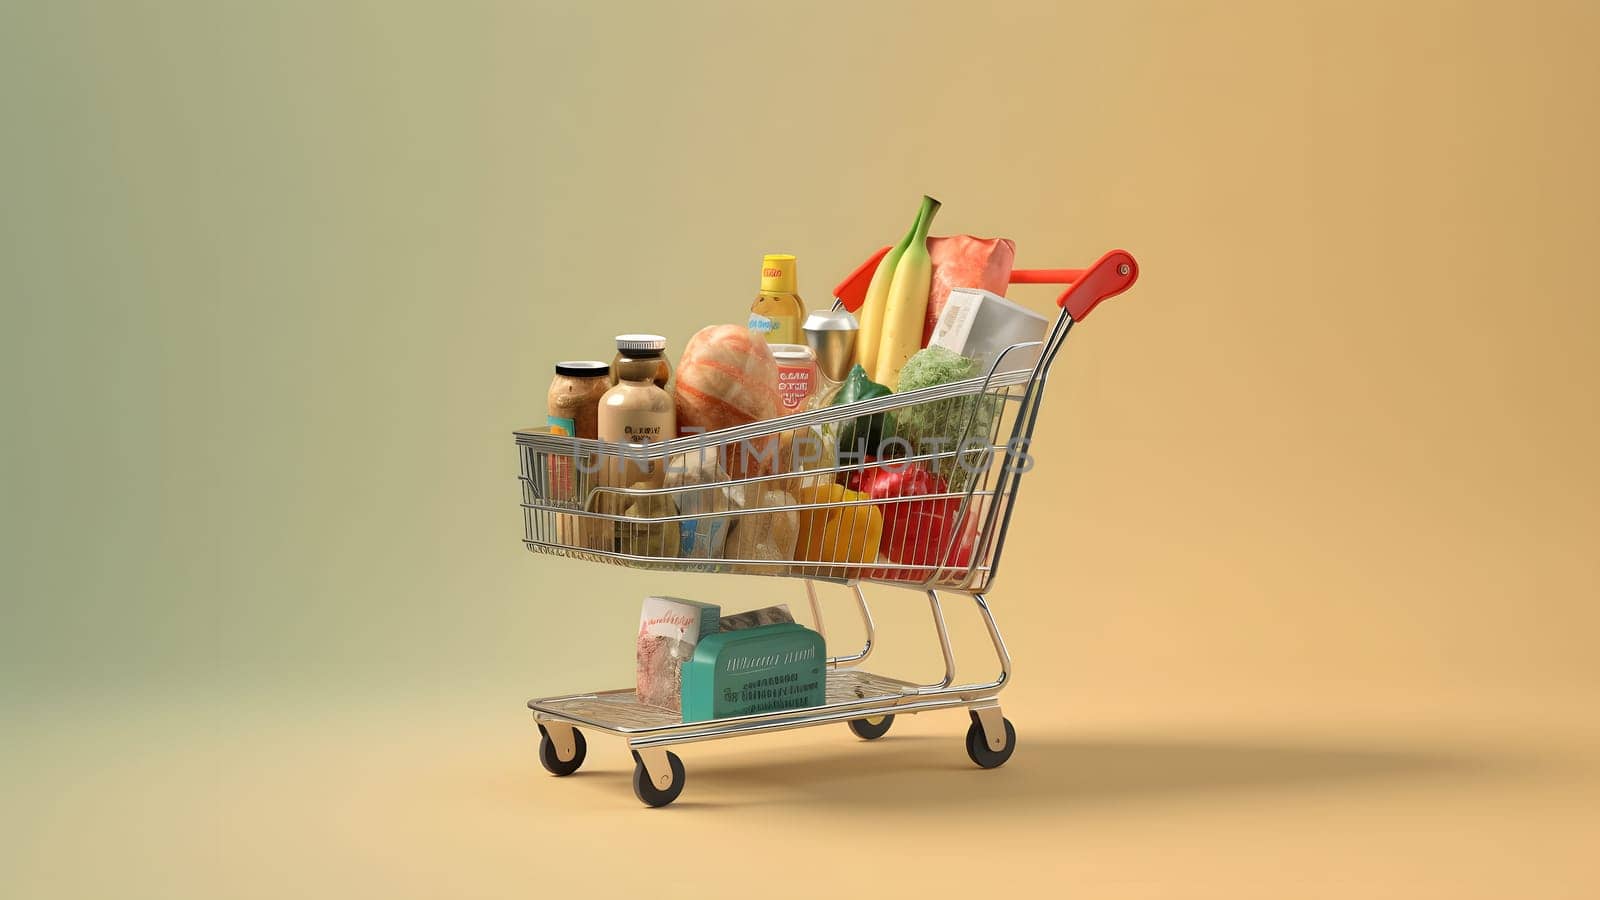 toy supermarket cart filled with products on yellow background, neural network generated image by z1b